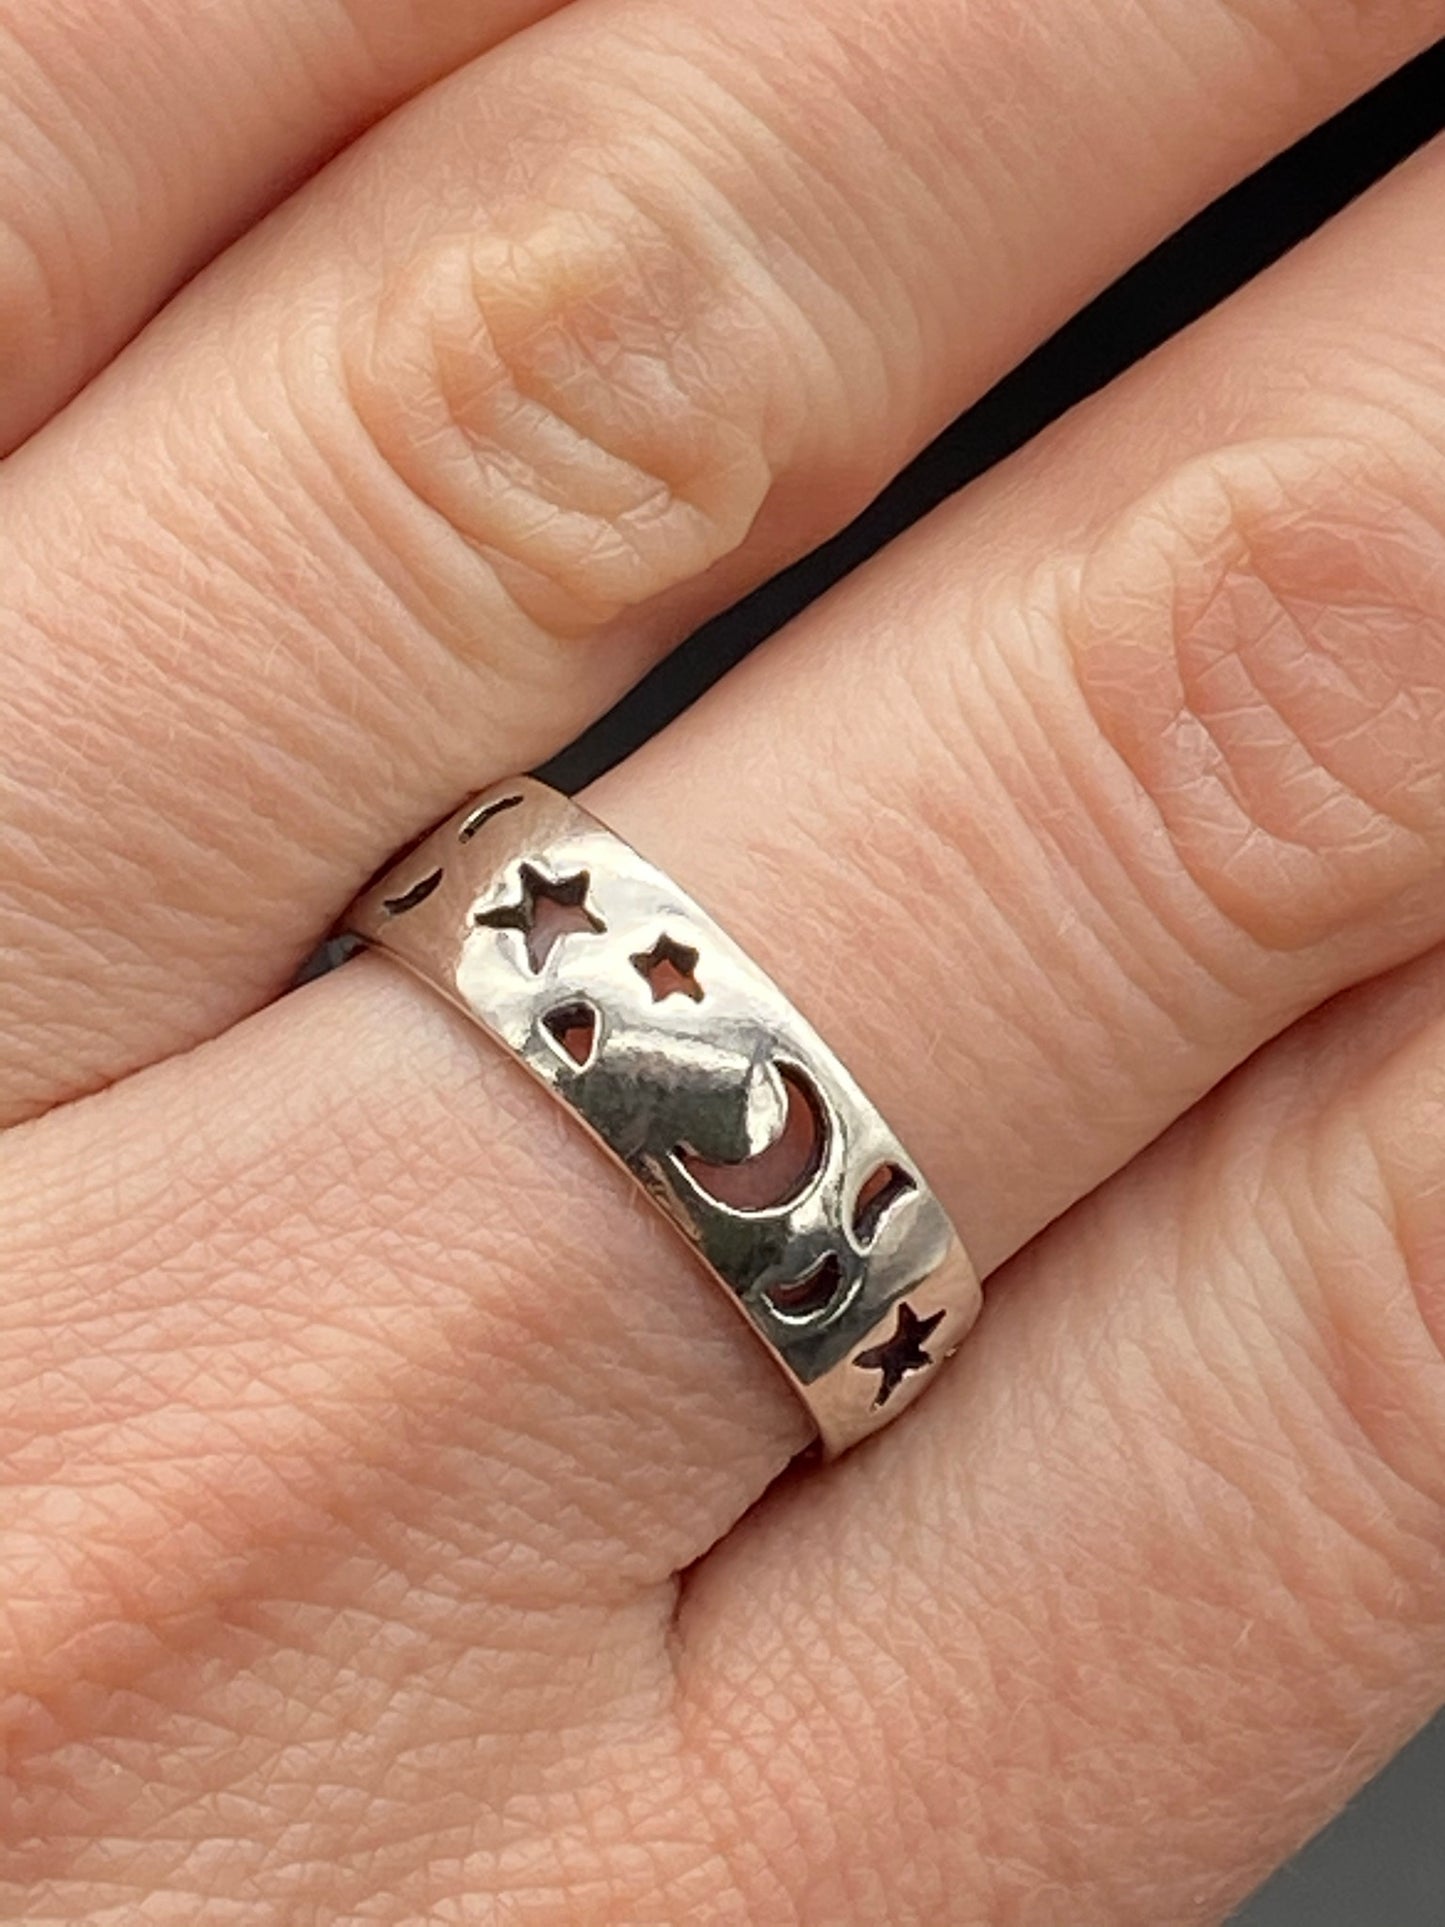 Night - Nice Star&Moon Slotted Ring